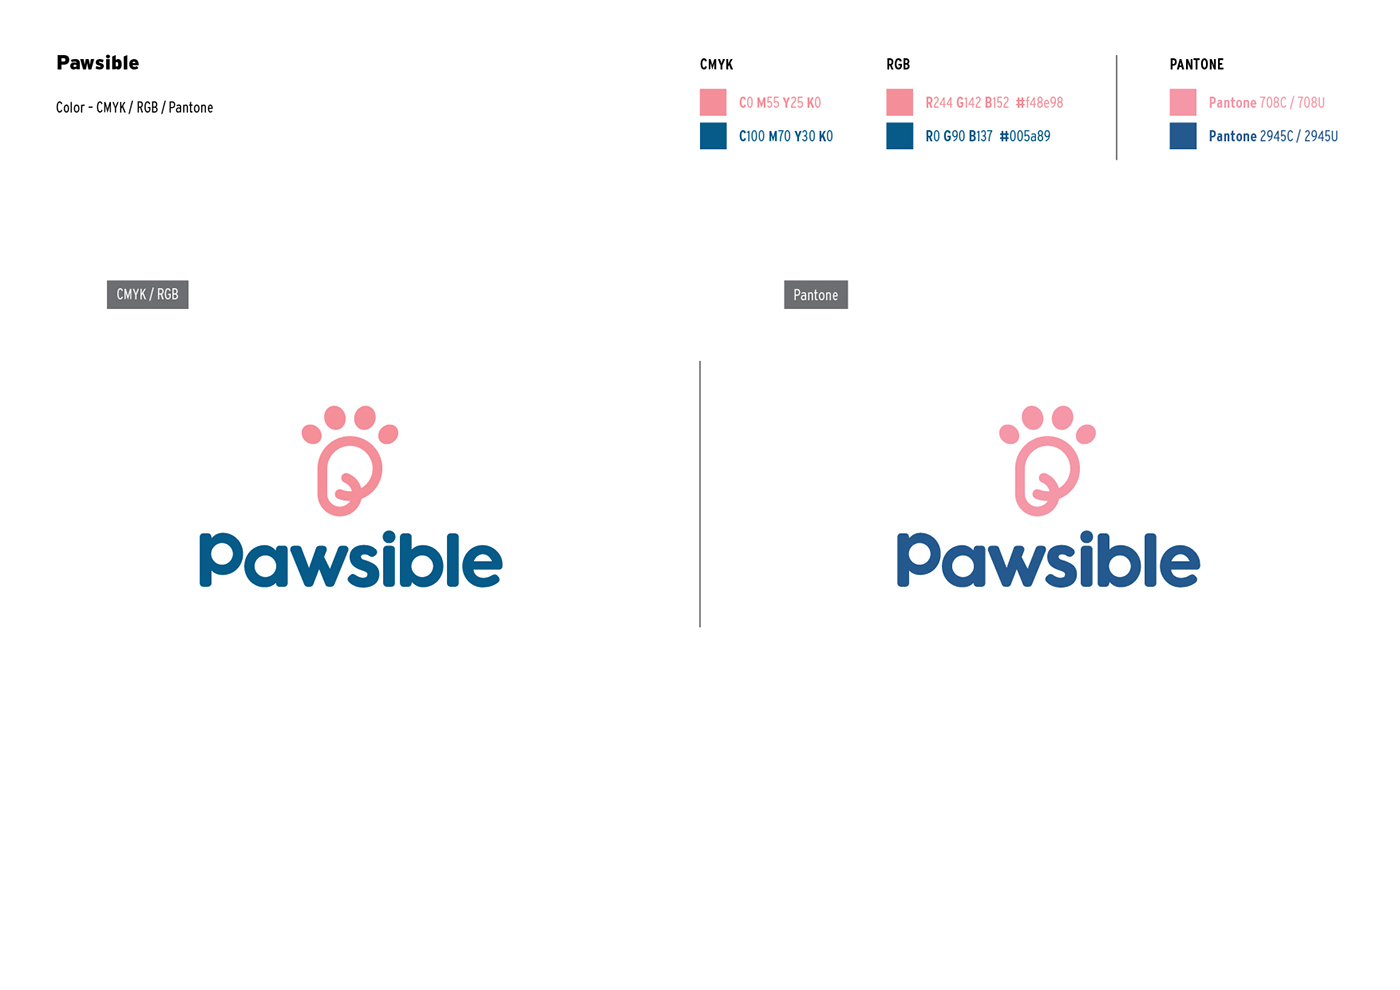 Pawsible is a social startup/enterprise uniting responsible pet-lovers to support each other through a sharing economy platform and build a pet friendly city through responsible